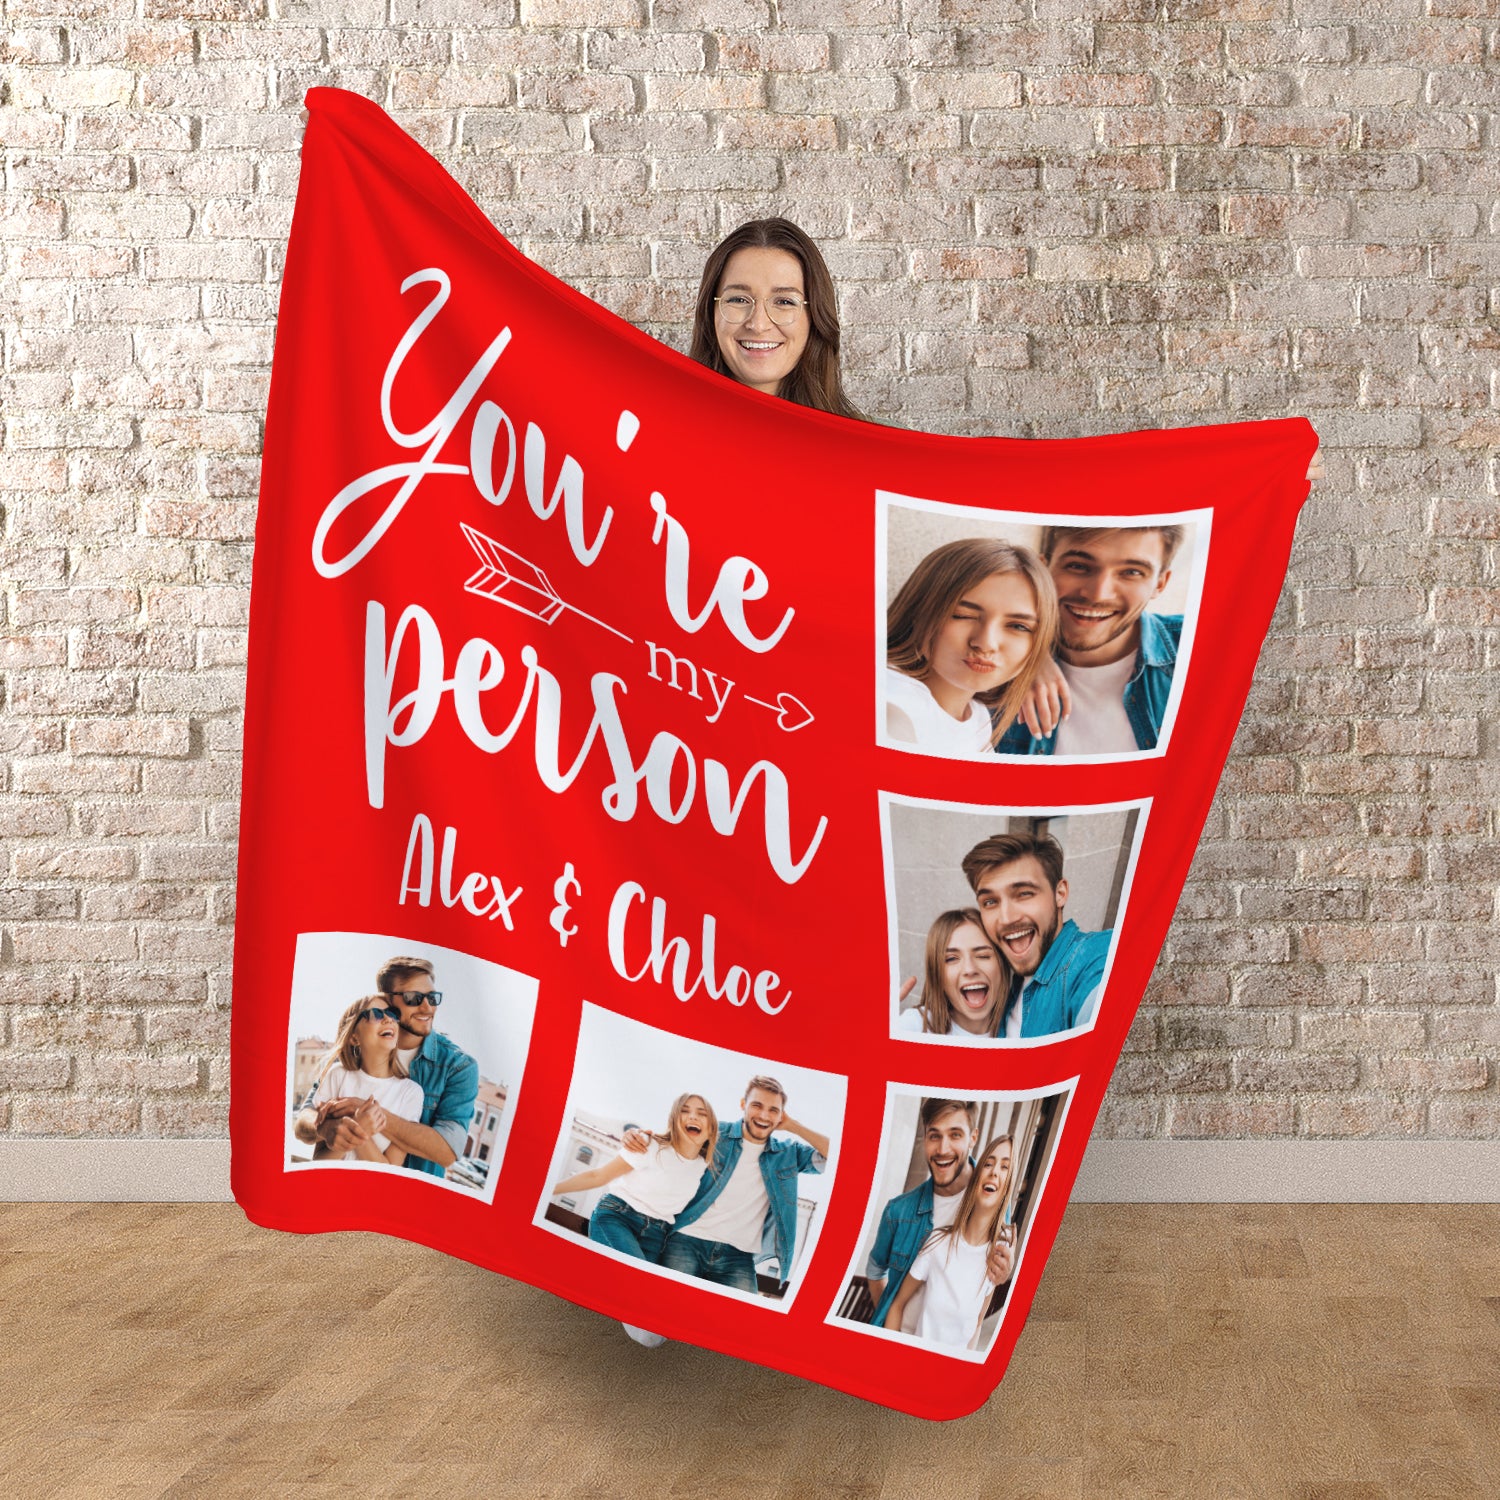 Personalised You're My Person - Custom Colour - 150 x 150cm Photo Fleece Blanket